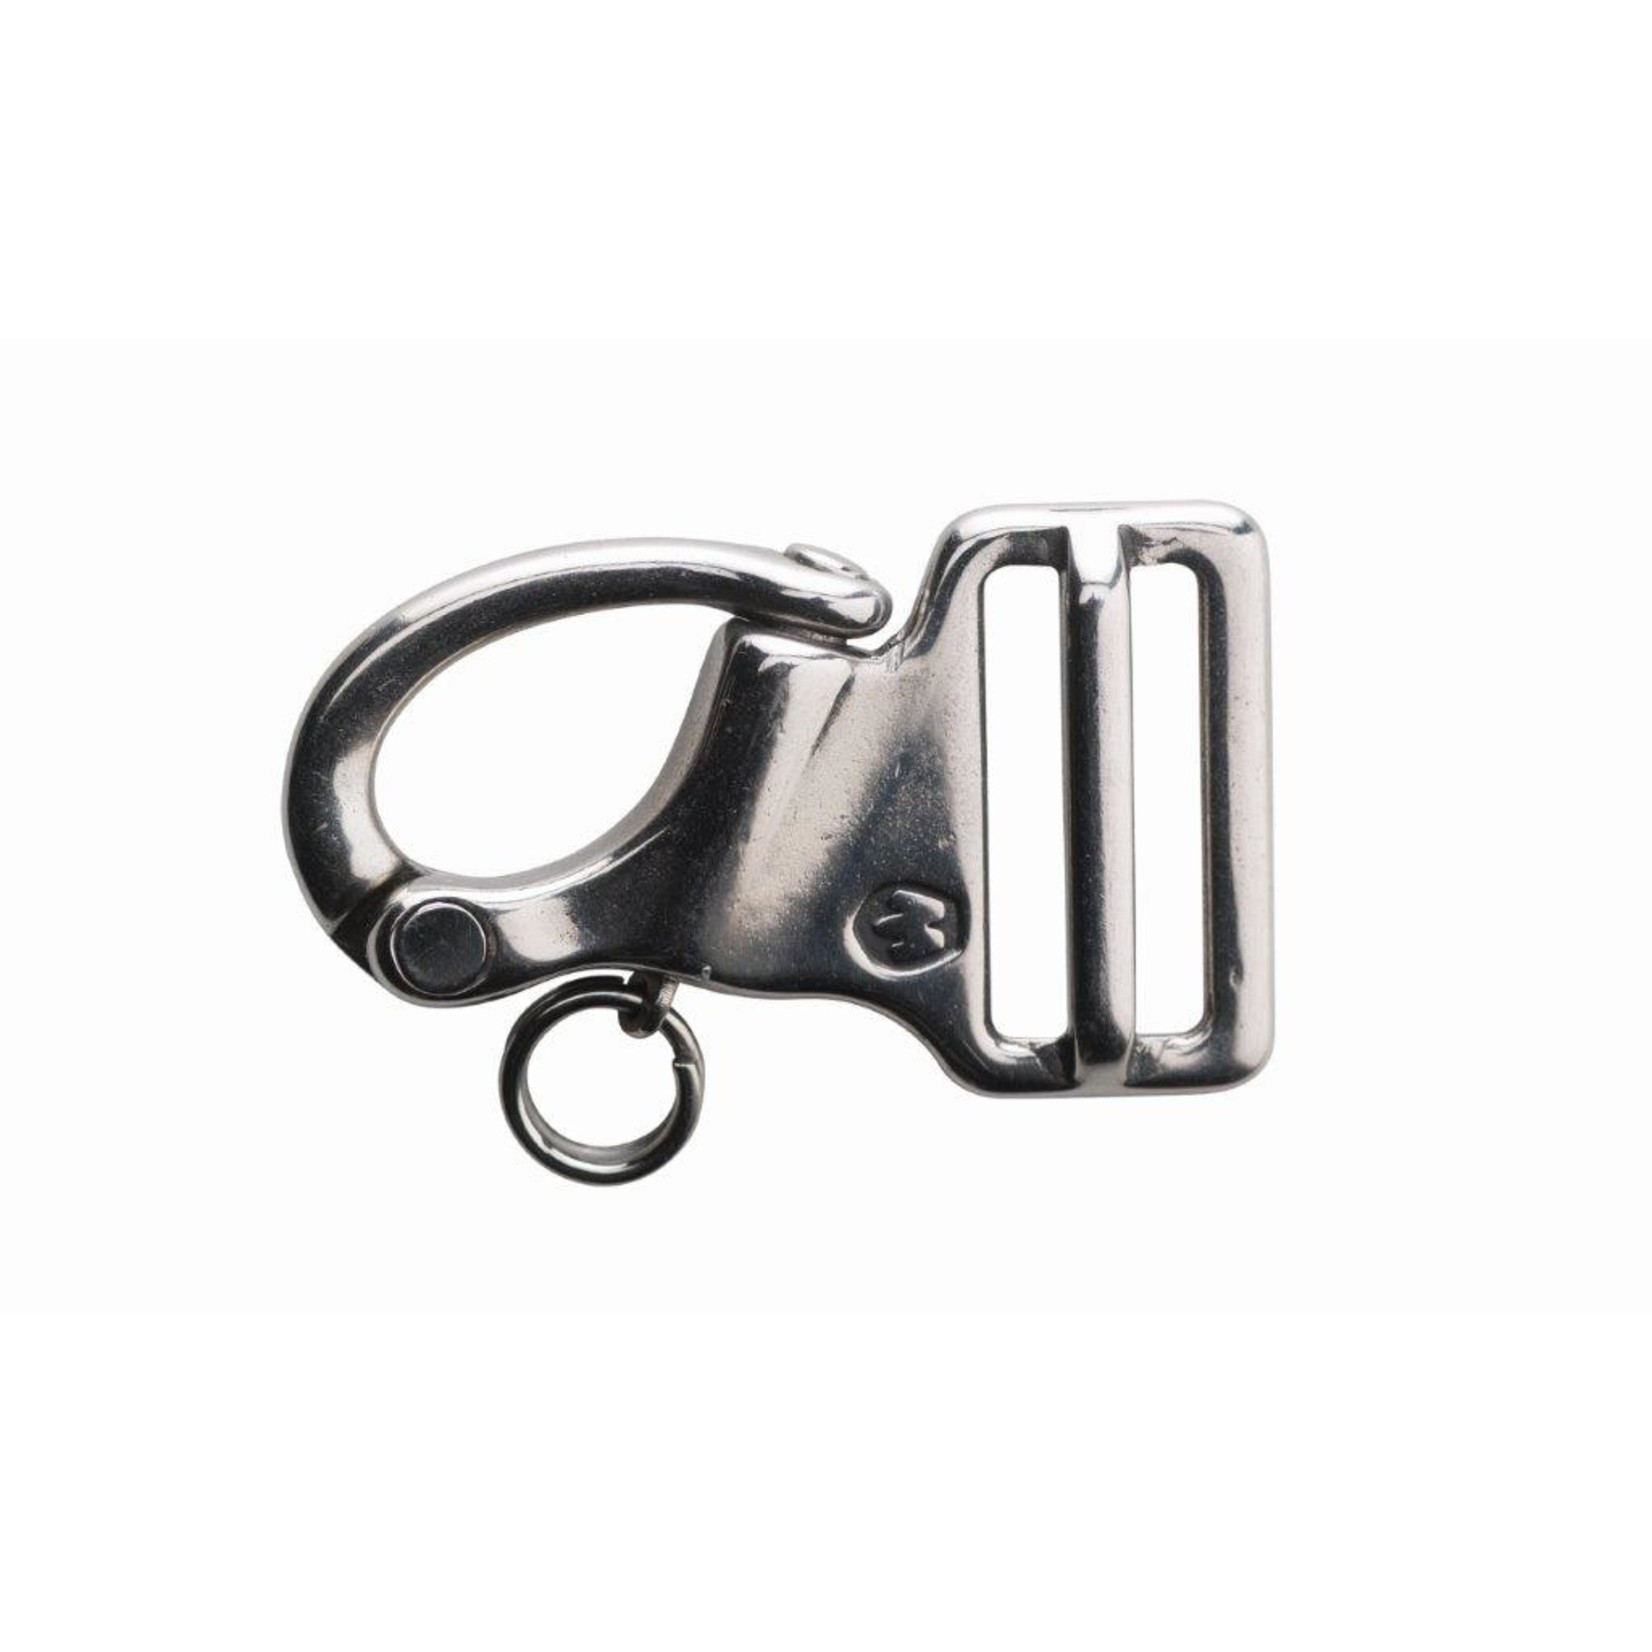 Wichard Snap hook with fixed eye - For 20 mm webbing - Length: 44 mm